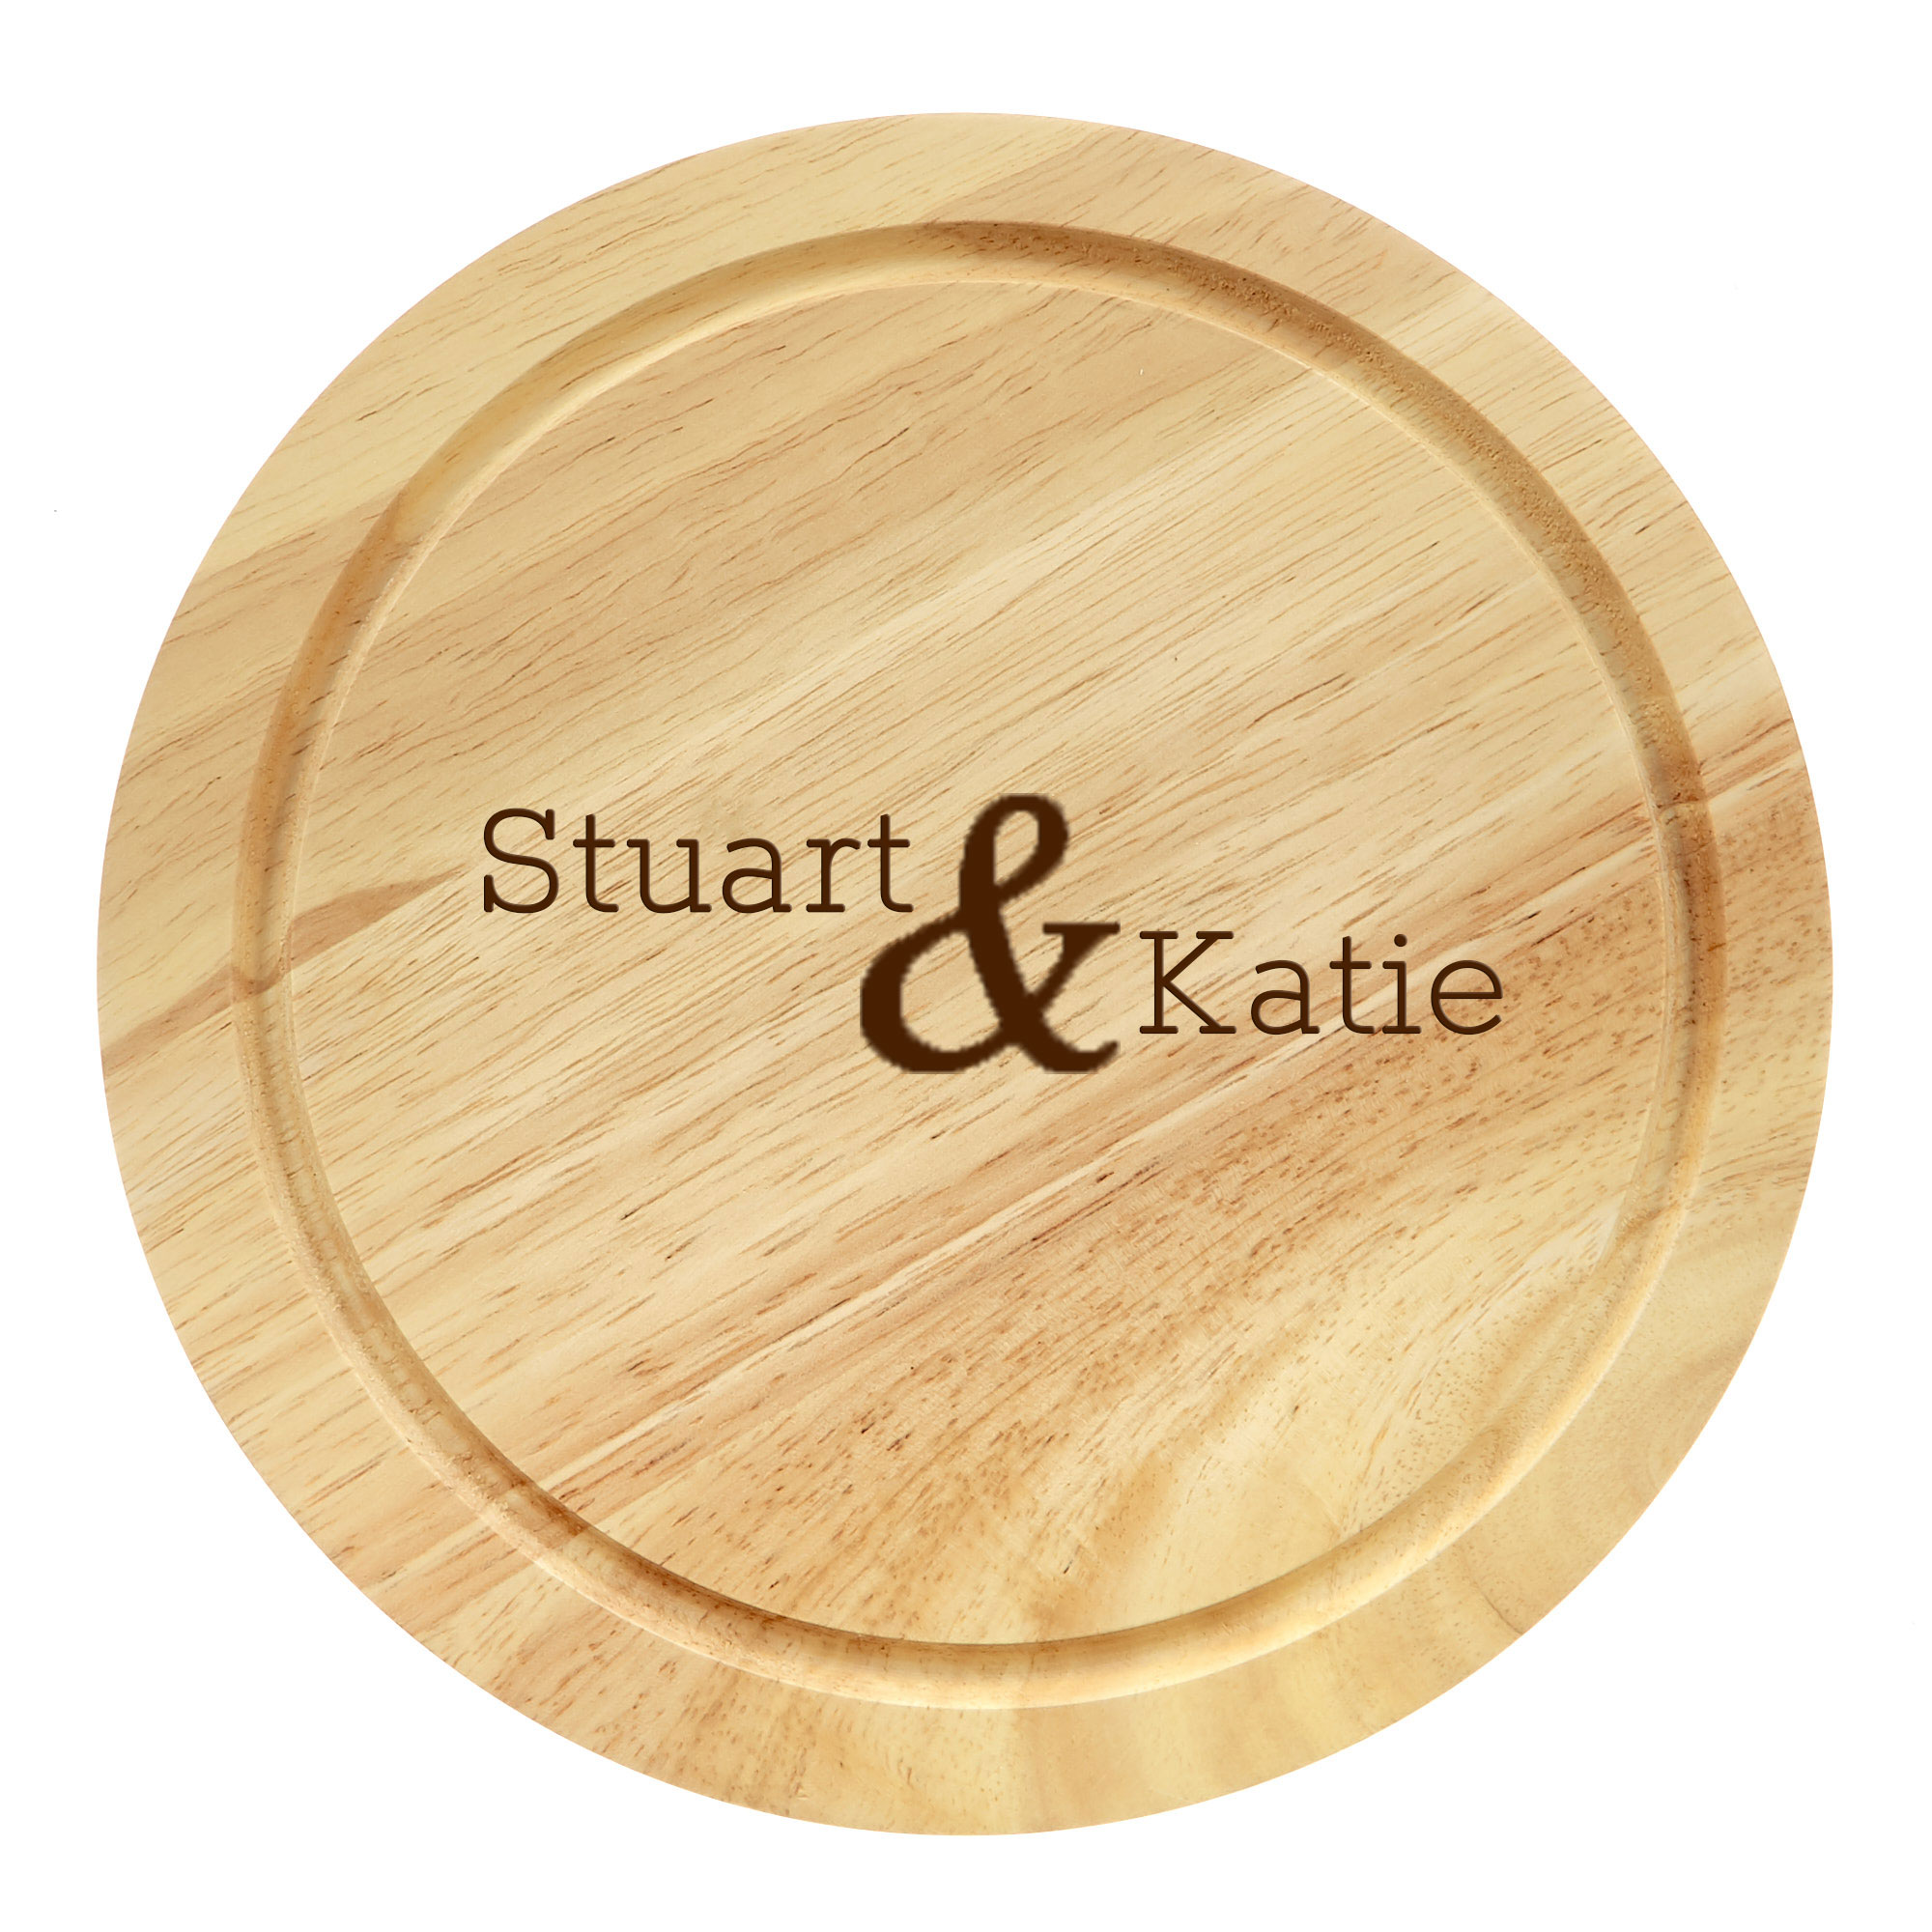 Personalised Engraved Wooden Cheeseboard Set - Couple's Names